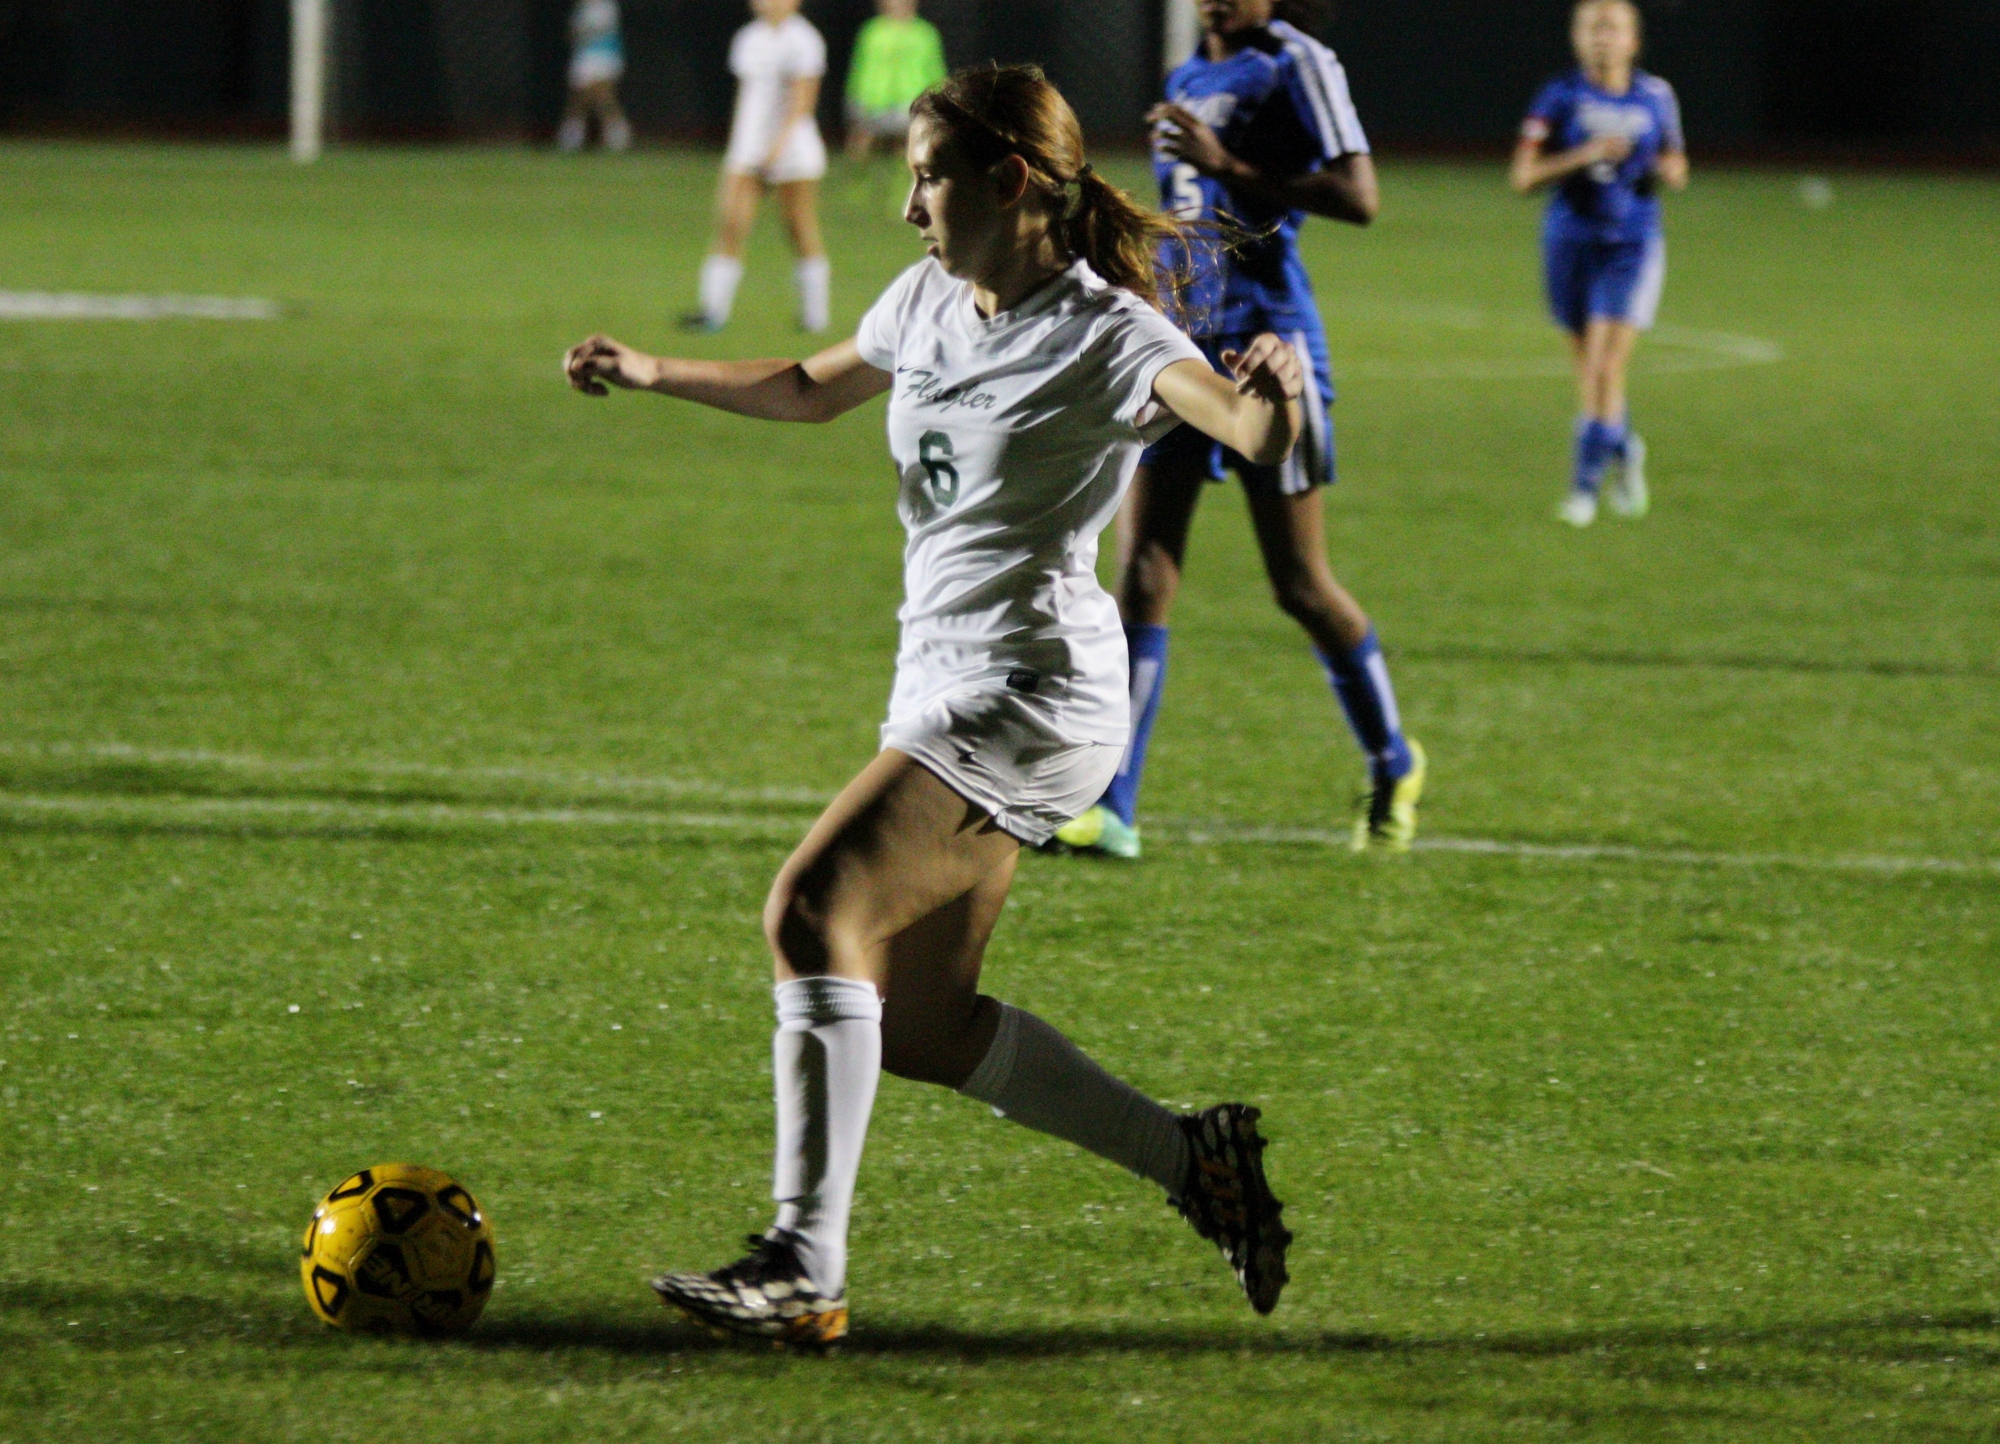 Julia Lombardo scores the first goal of the night for the Bulldogs. Photos by Jeff Dawsey